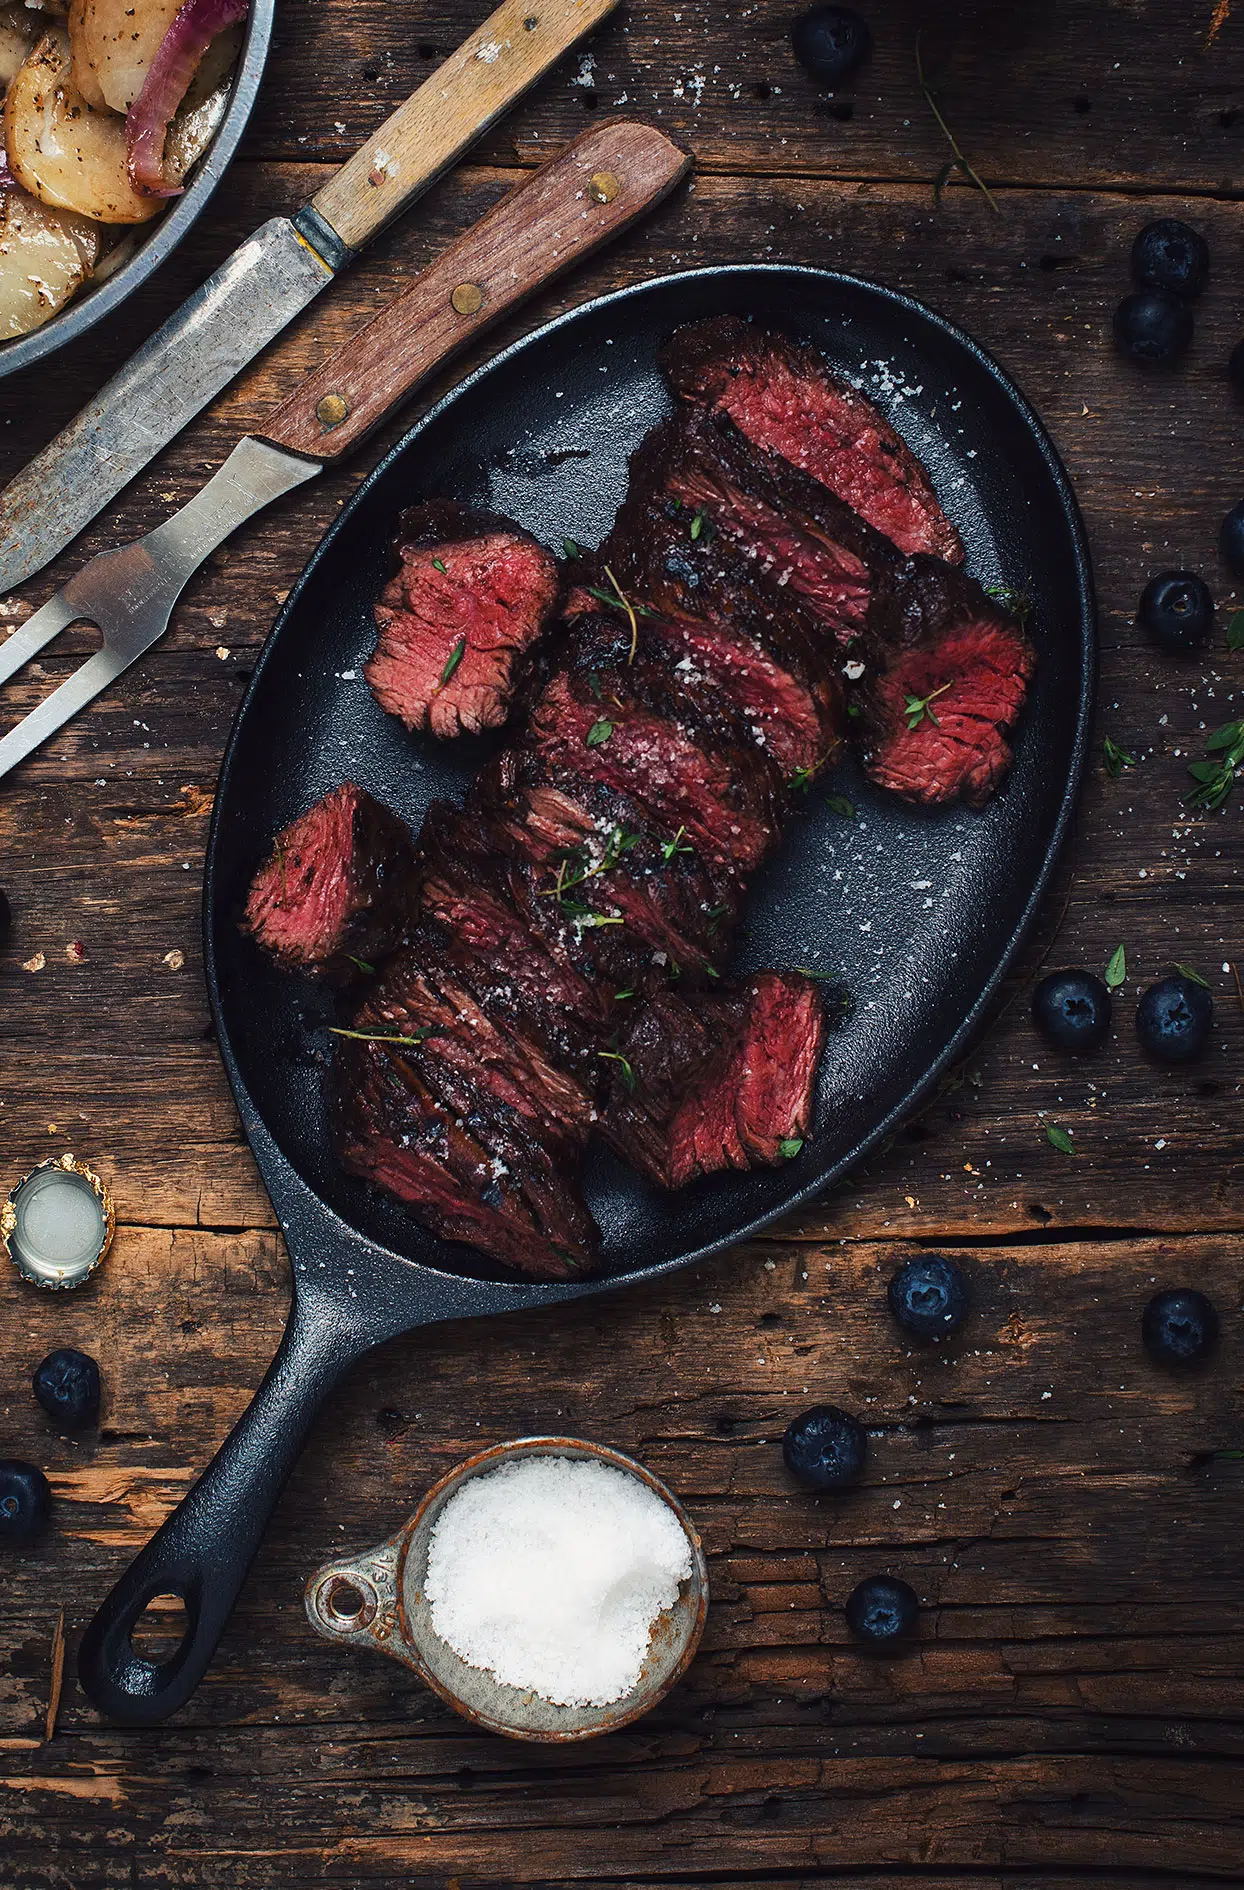 Grilled hanger steak with blueberry and balsamic vinegar marinade